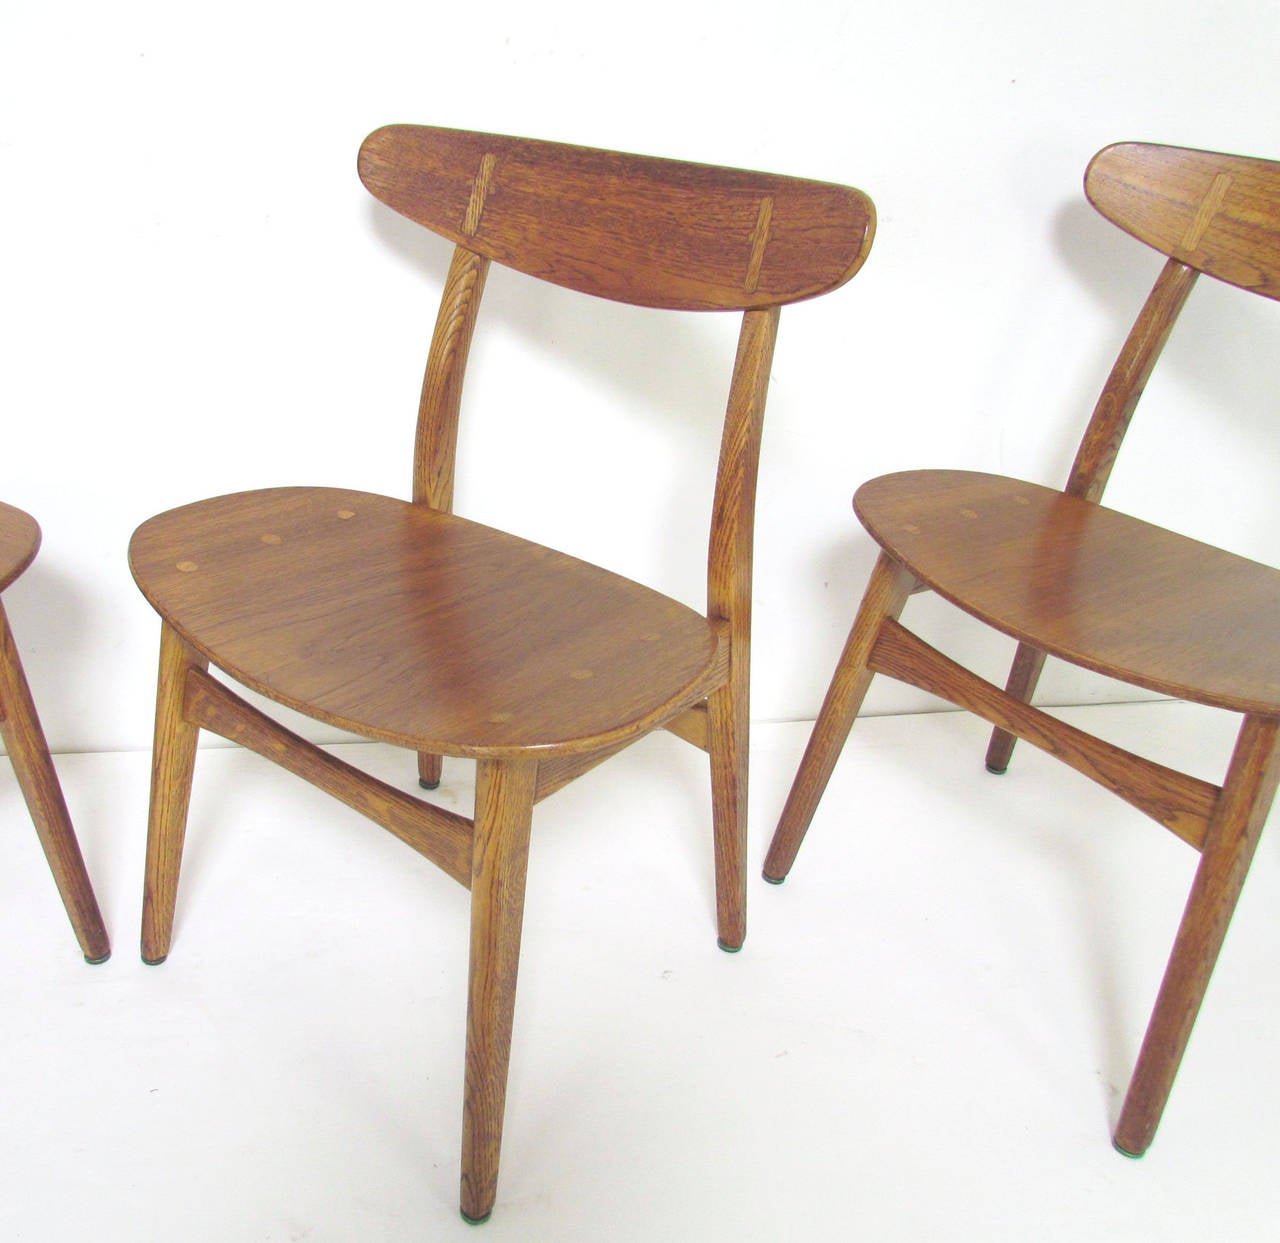 Set of four Danish dining chairs, model CH 30, designed by Hans Wegner for Carl Hansen, circa 1960s. 

Teak seats and seat backs with oak inlay and legs, original aged patina. Original owner had custom cushions created for these which are still